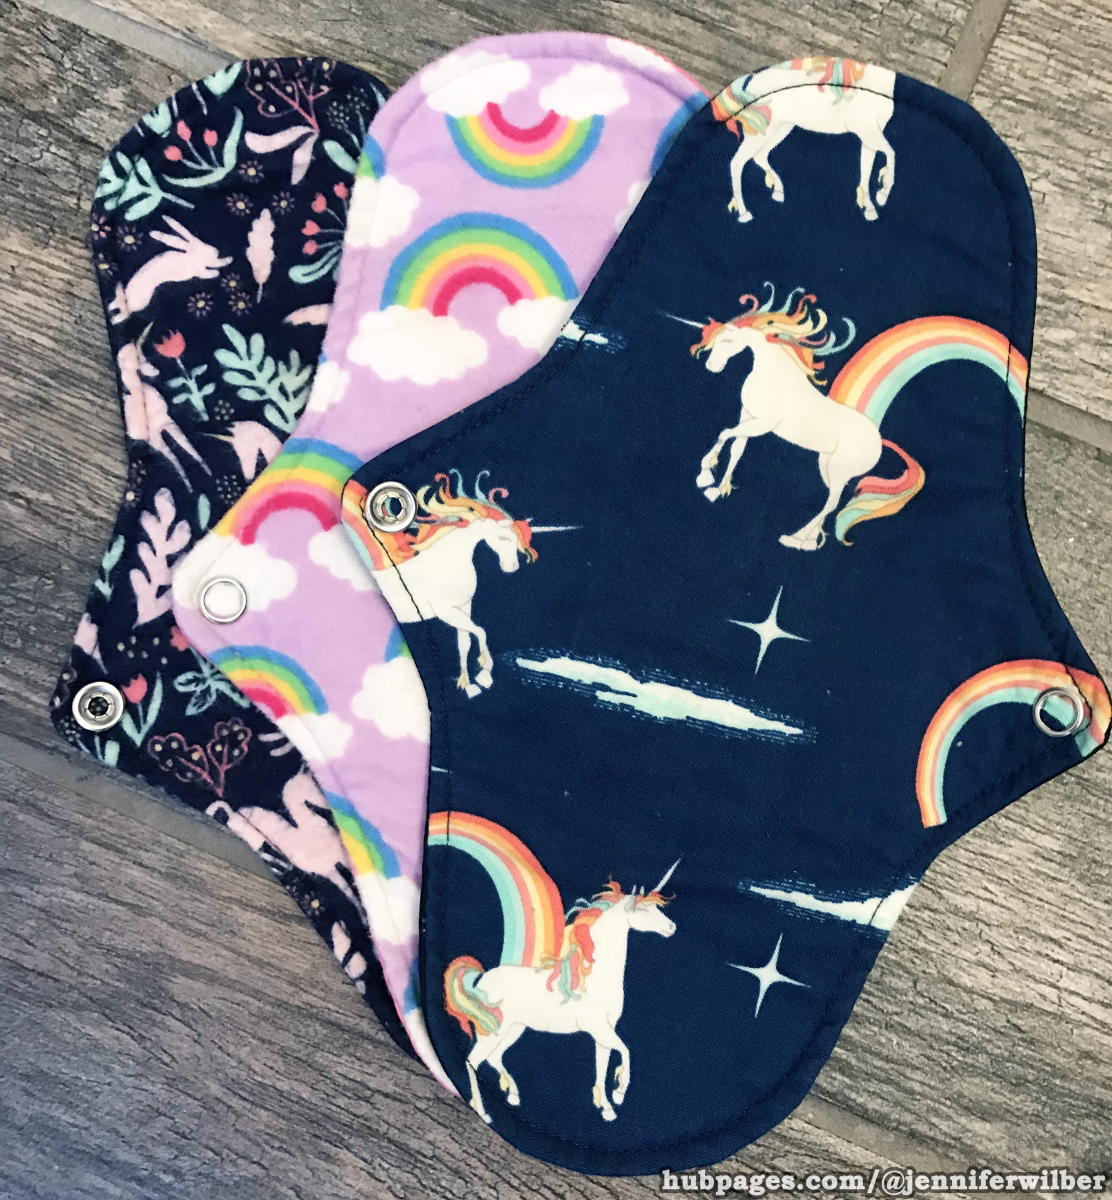 Party in My Pants cloth pads - Luxe Liners in "Avalon," "Double Rainbow," and "Under le Rainbow." Much unicorn. Such magical. Wow!